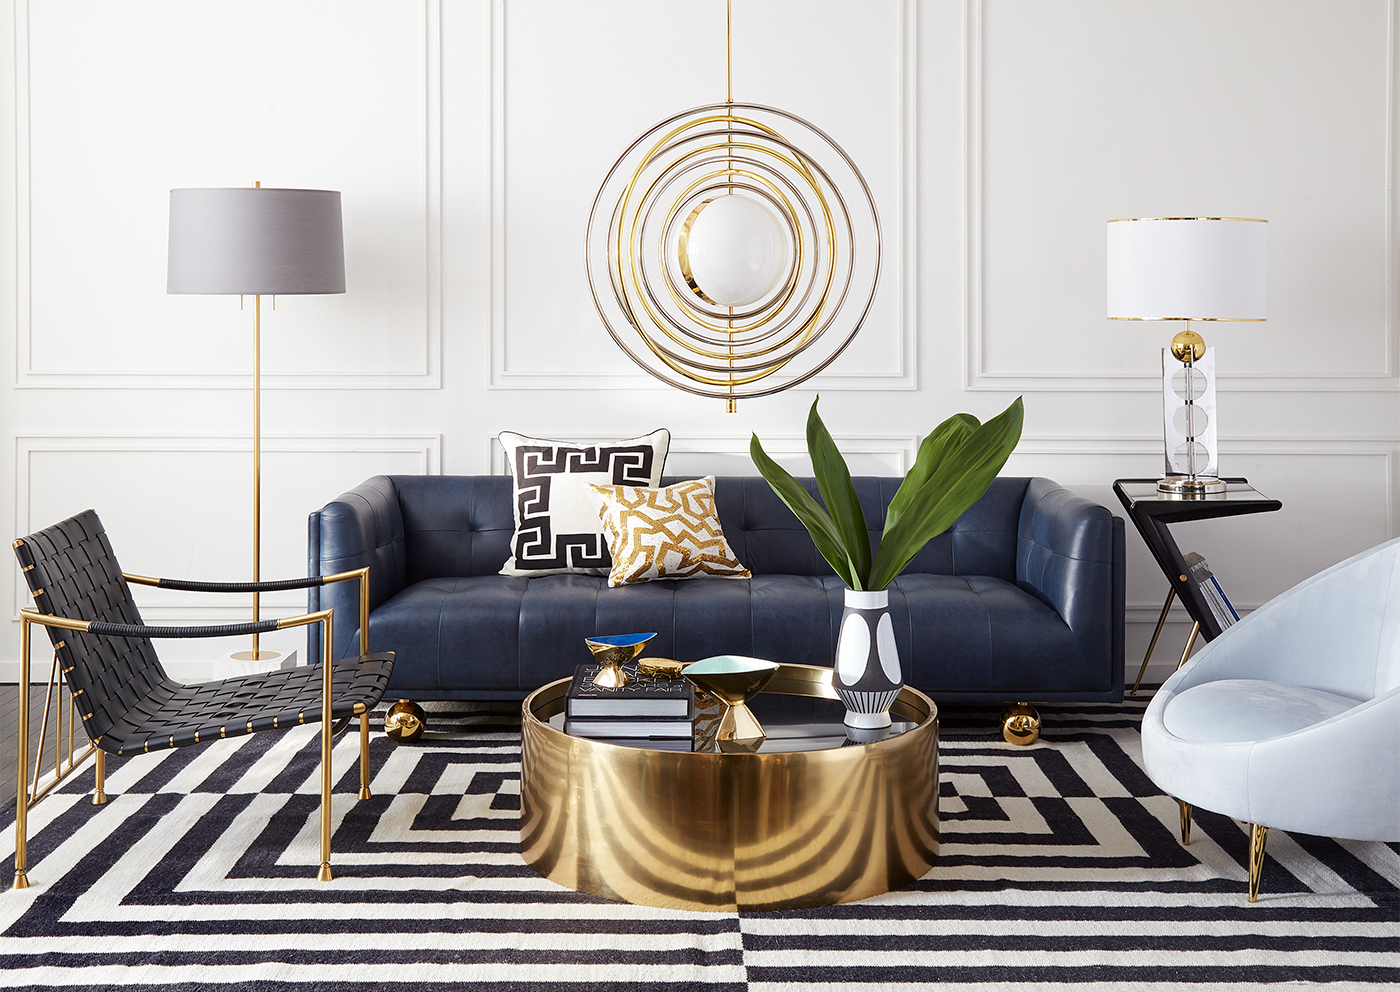 Spherical chandelier over gold coffee table and black and white striped rug in a modern living room